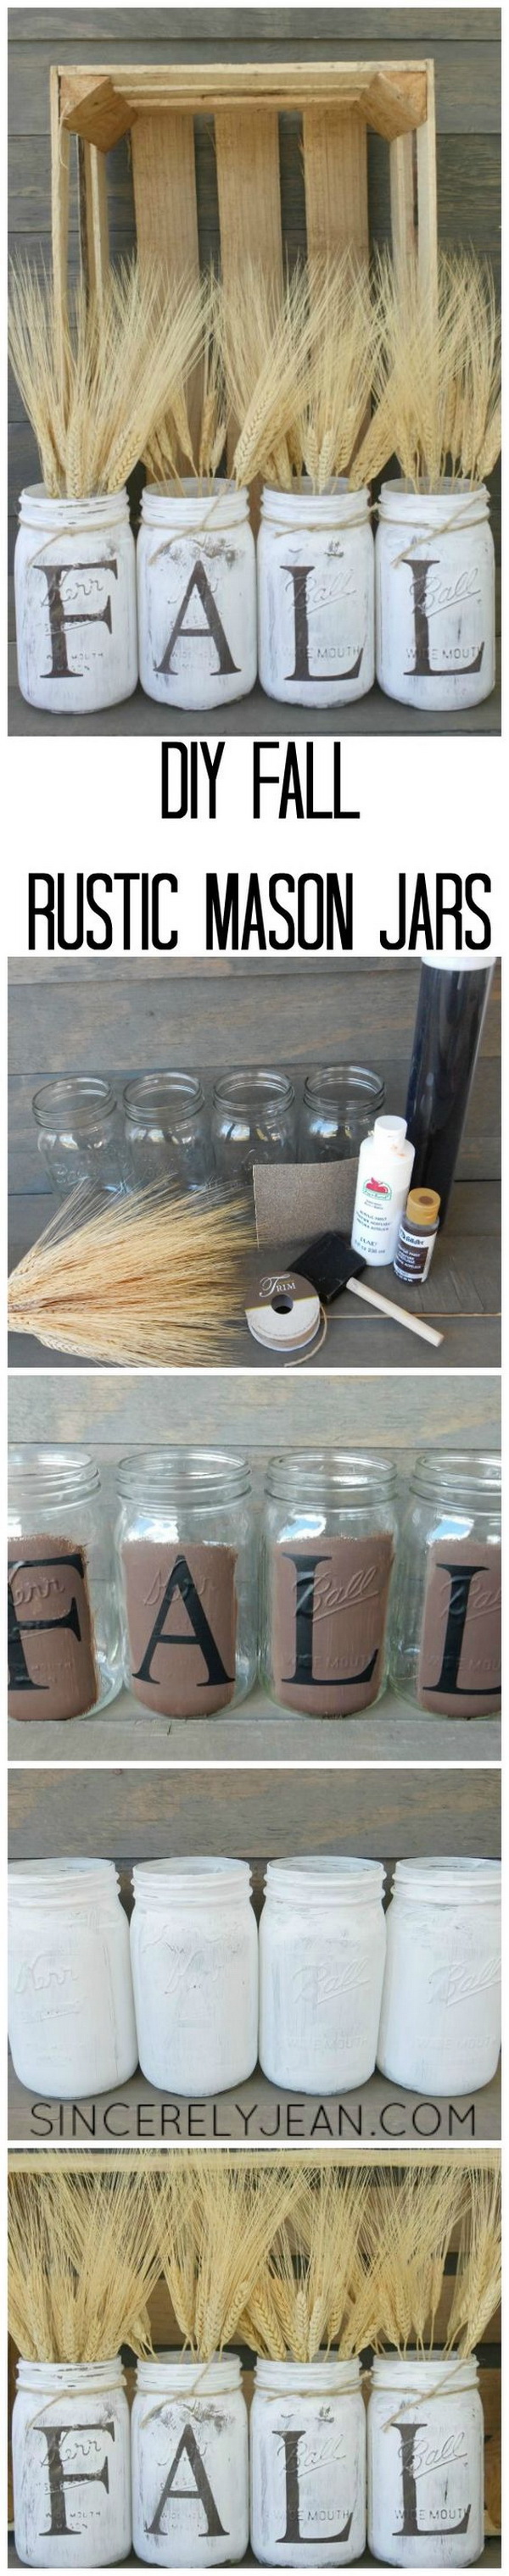 DIY Fall Rustic Mason Jars. Paint and distress mason jars and filled with whea! So easy and quick to do and makes a great addition to your fall decoration with rustic flair. 